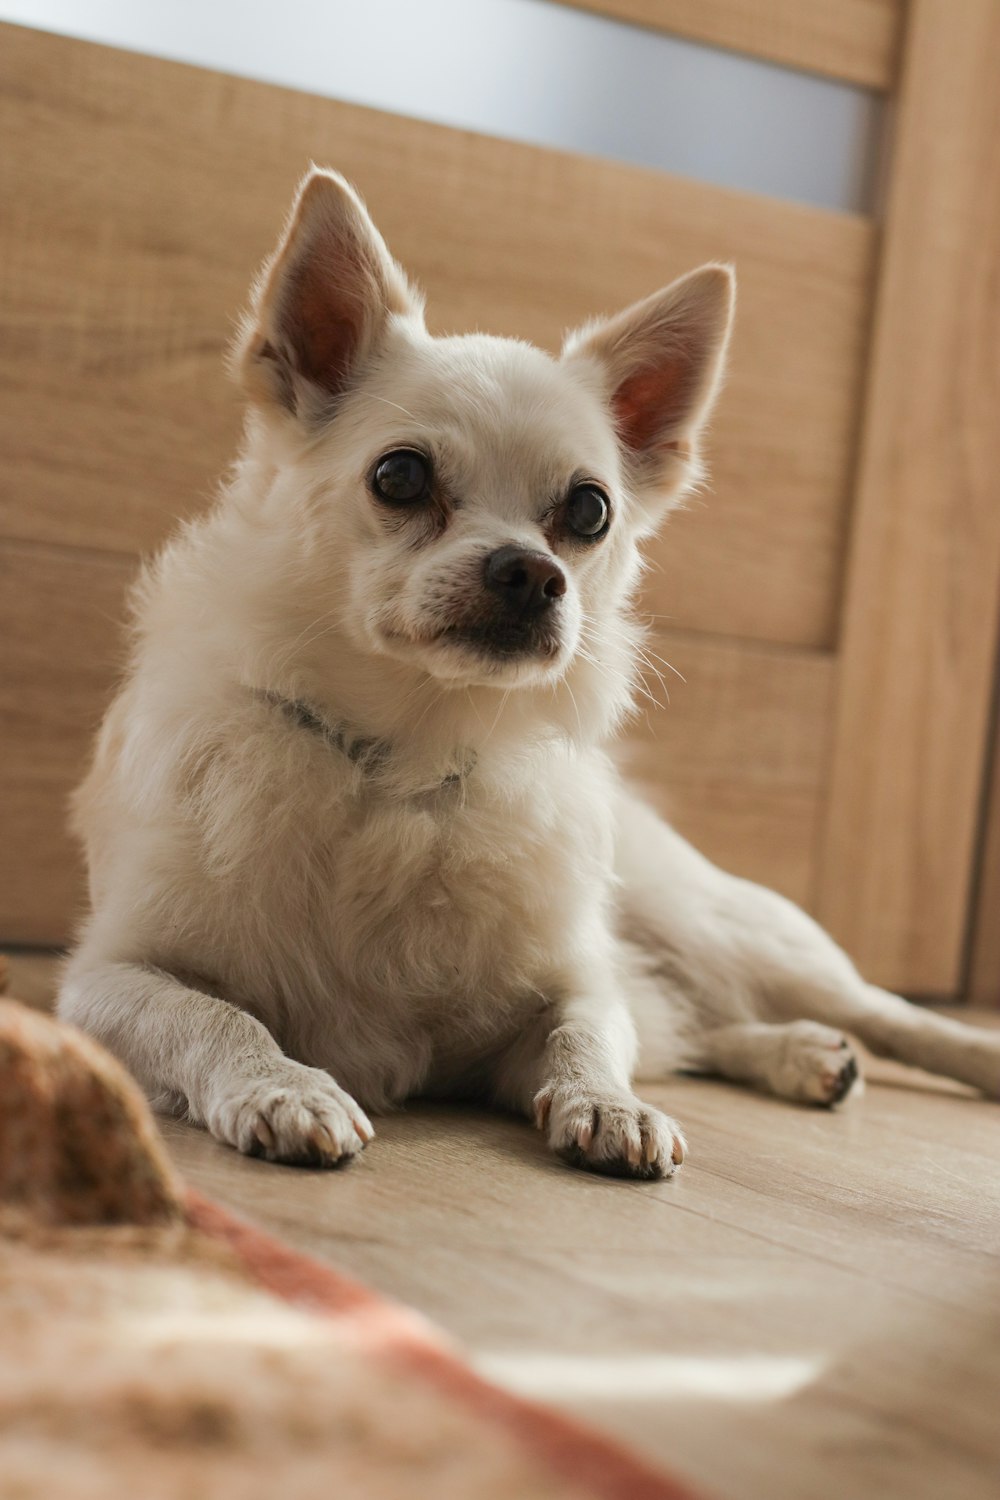 a small white dog sitting on a wooden floor